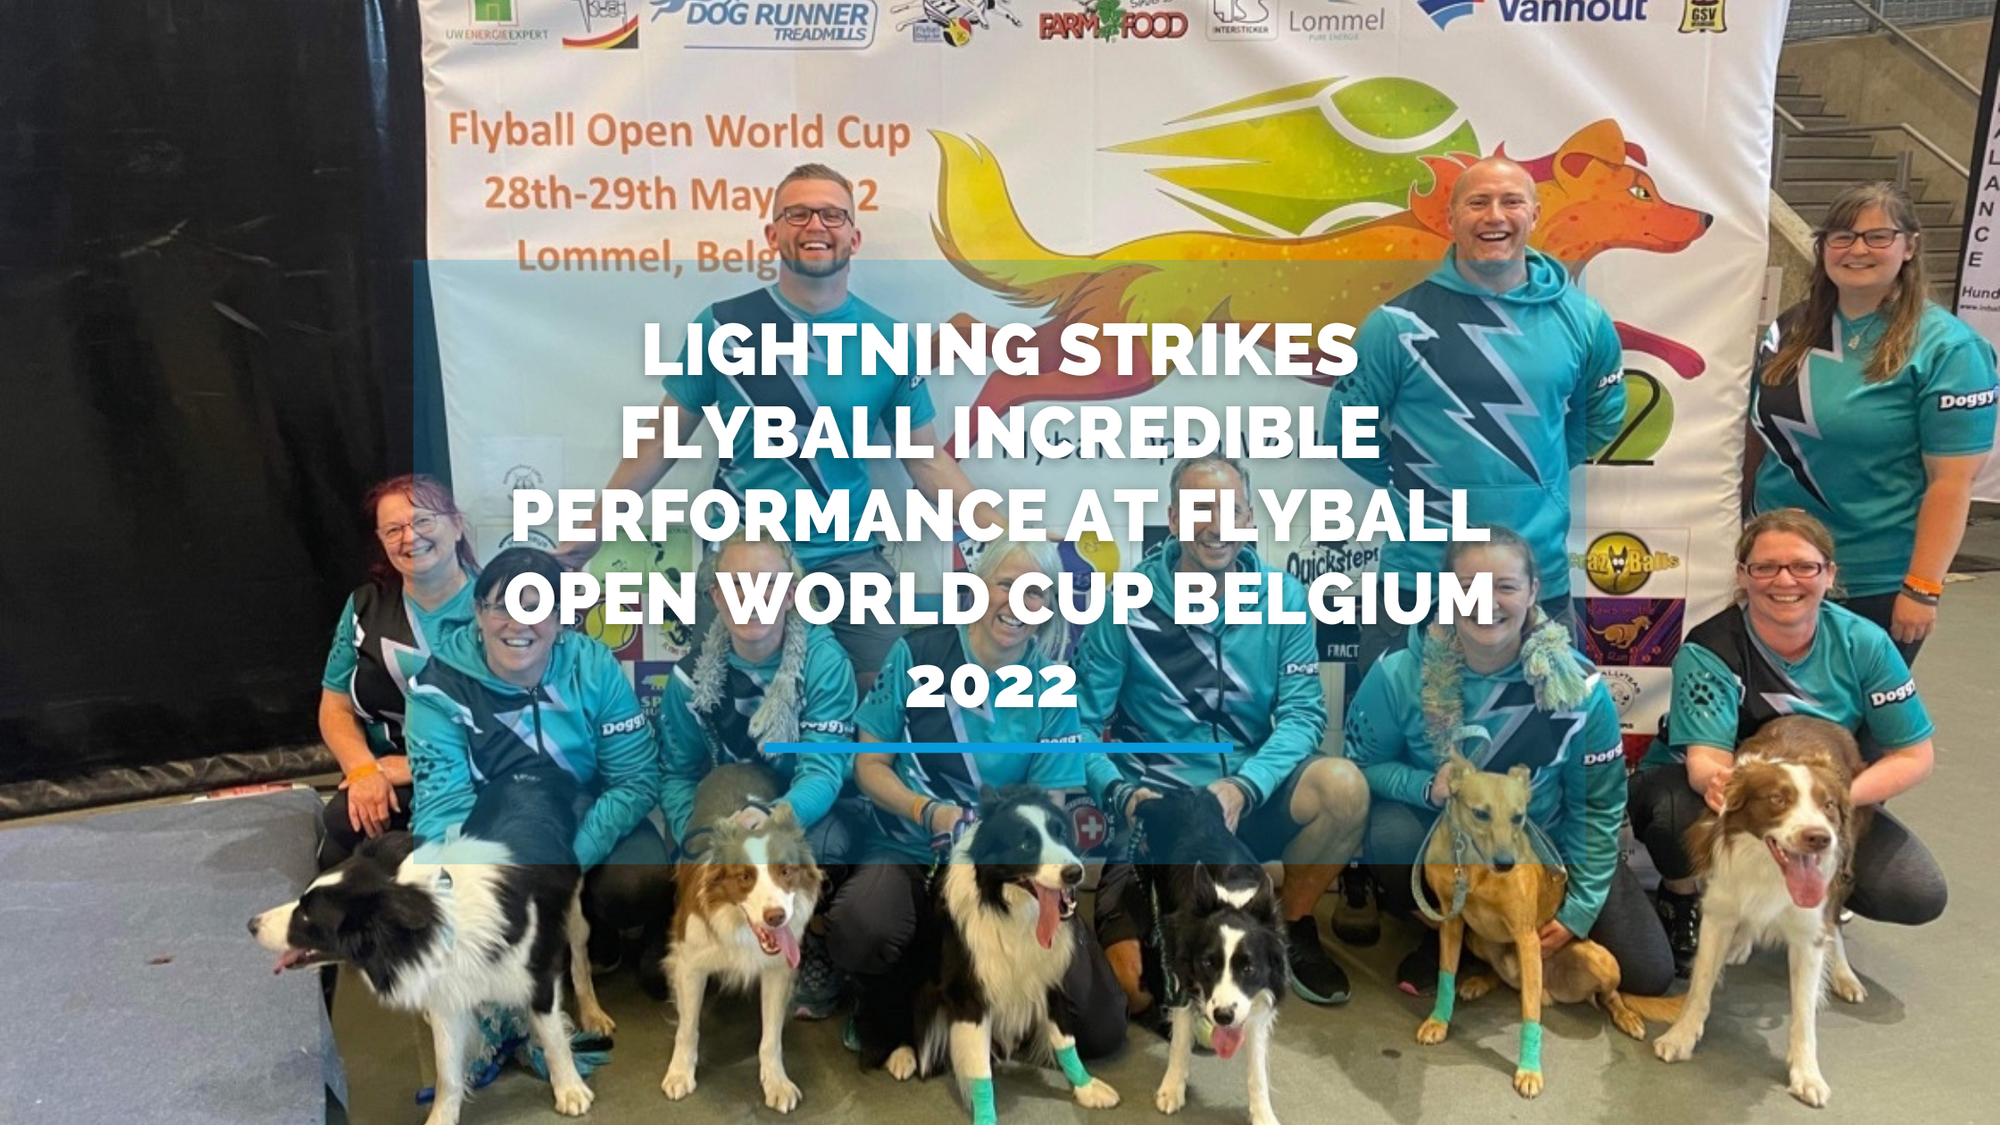 Lightning Strikes Flyball Incredible Performance at Flyball Open World Cup Belgium 2022